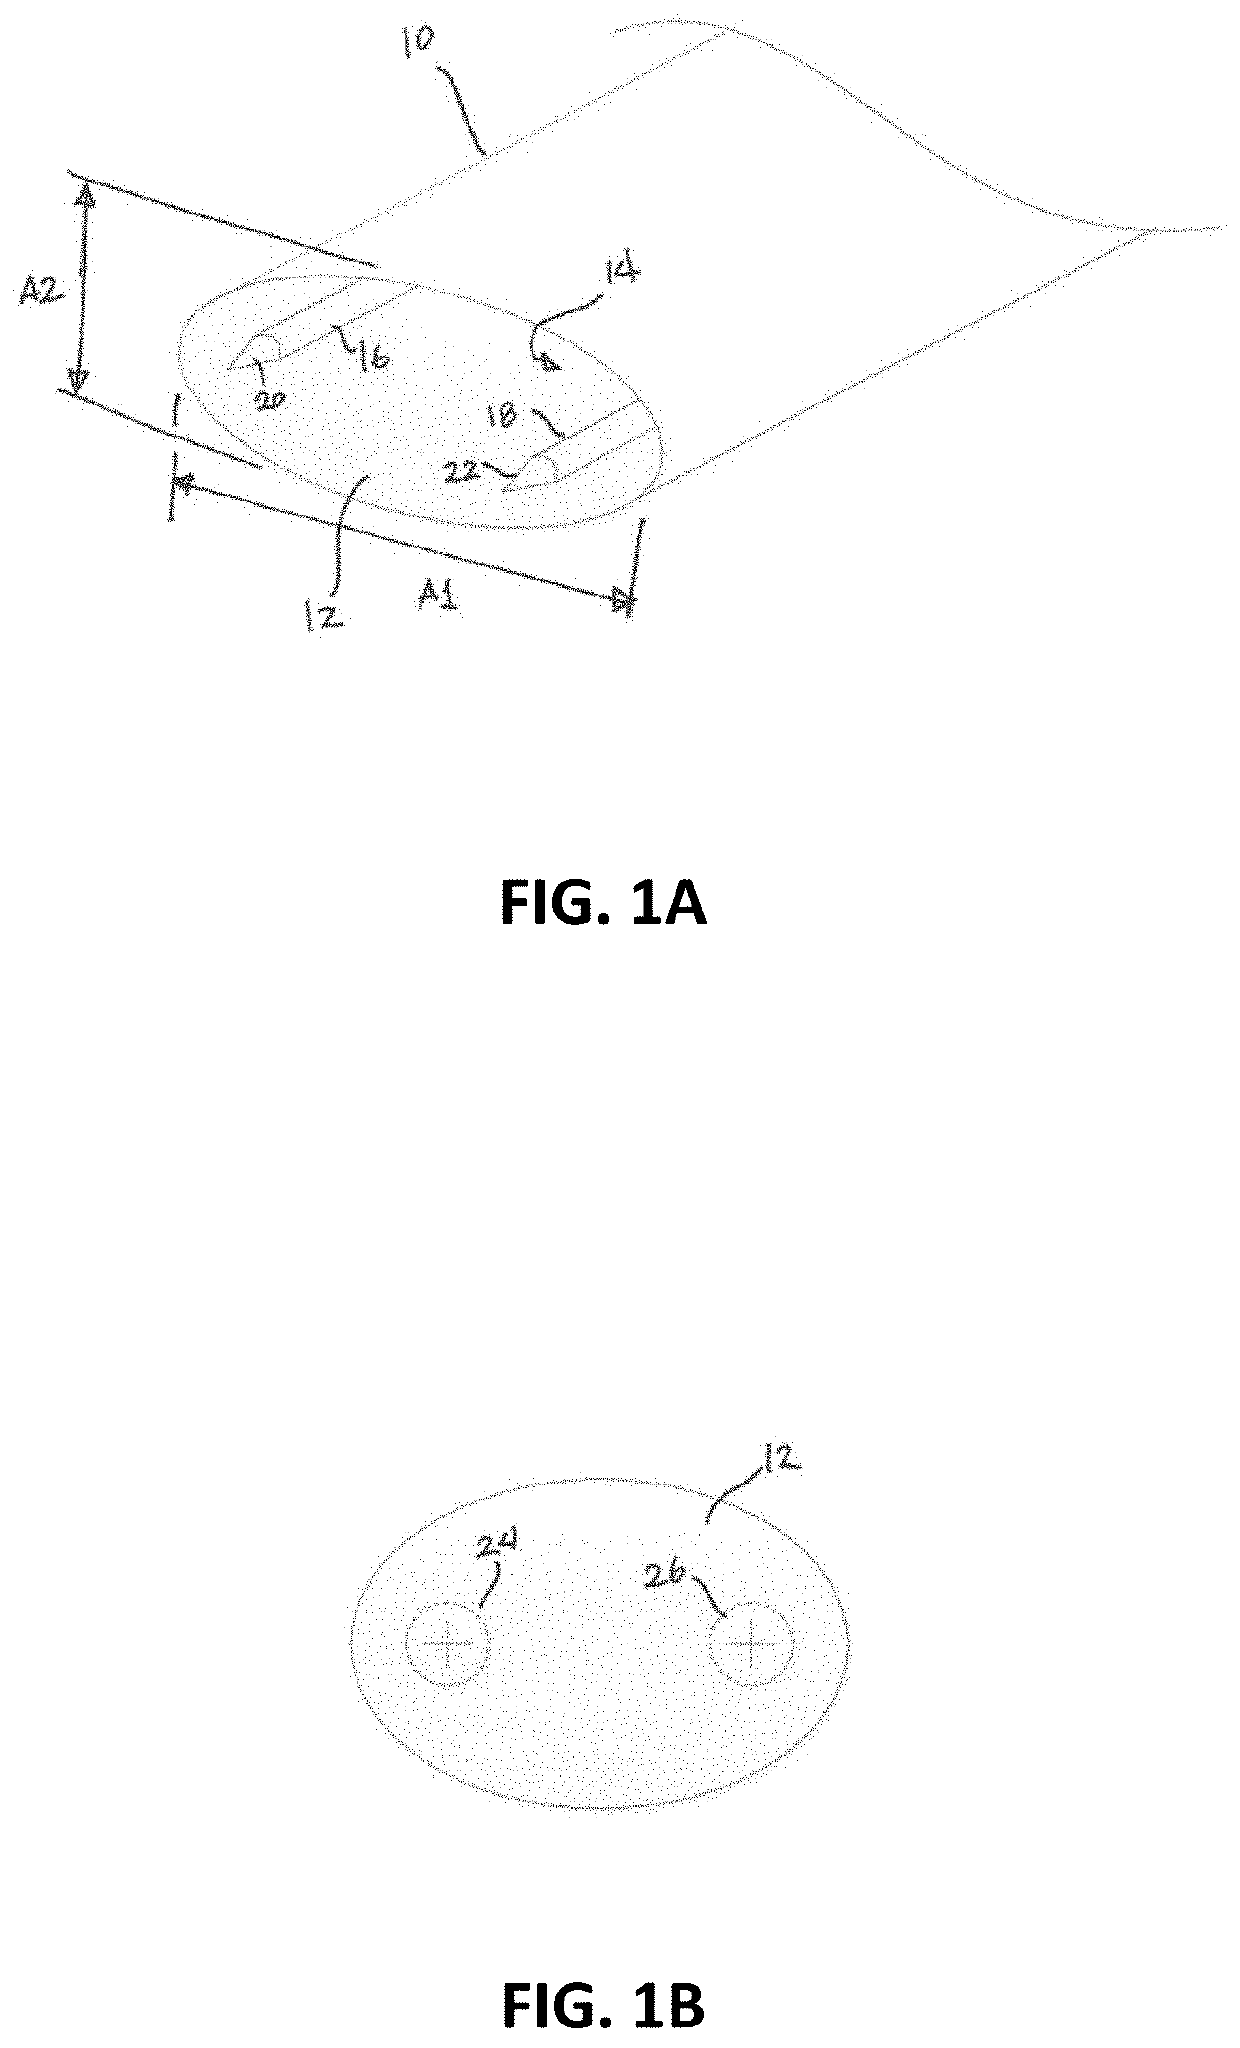 Soft suture staple system with tethered anchoring mechanism